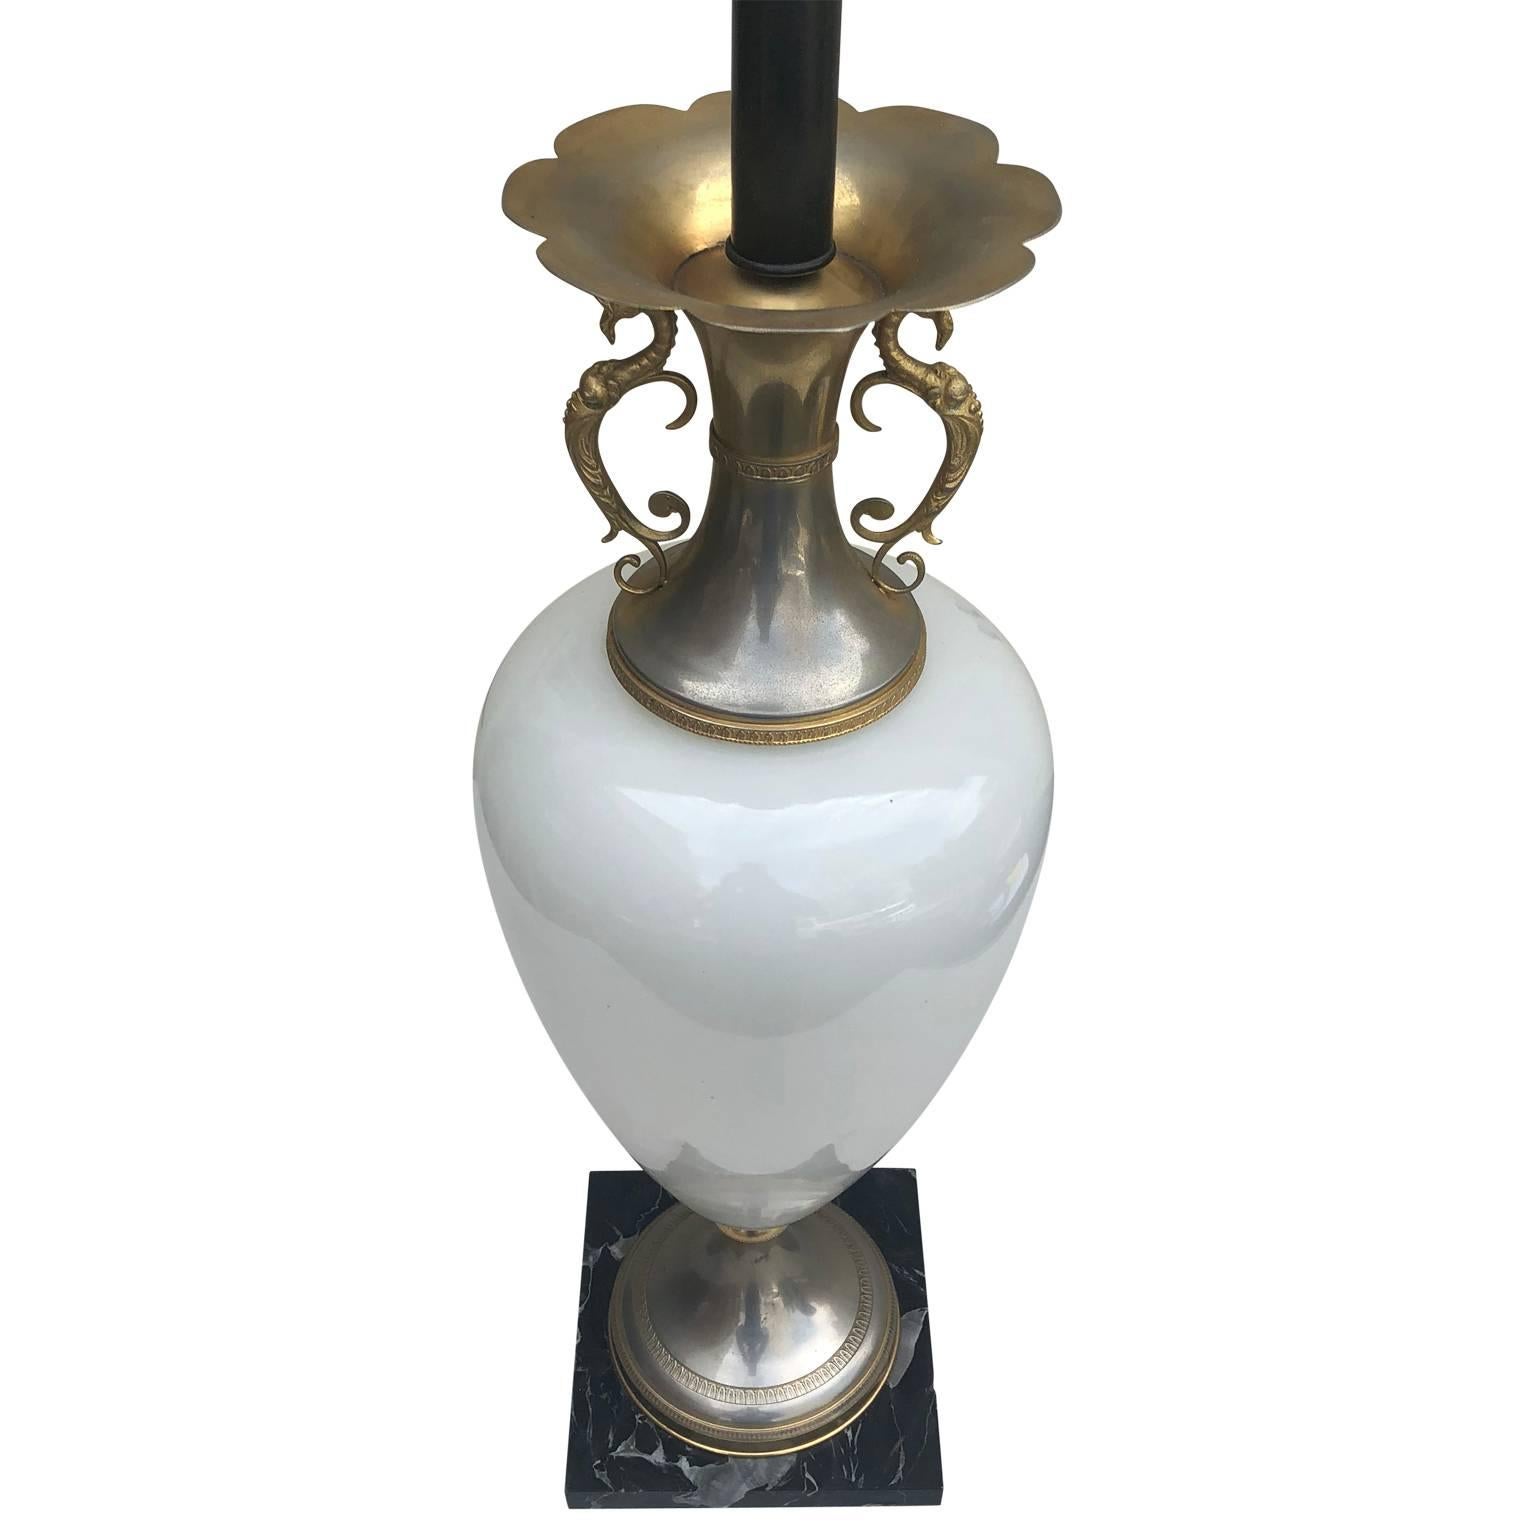 Large white opaline table lamp on black marble base.

Height to top of socket is 24 inches.